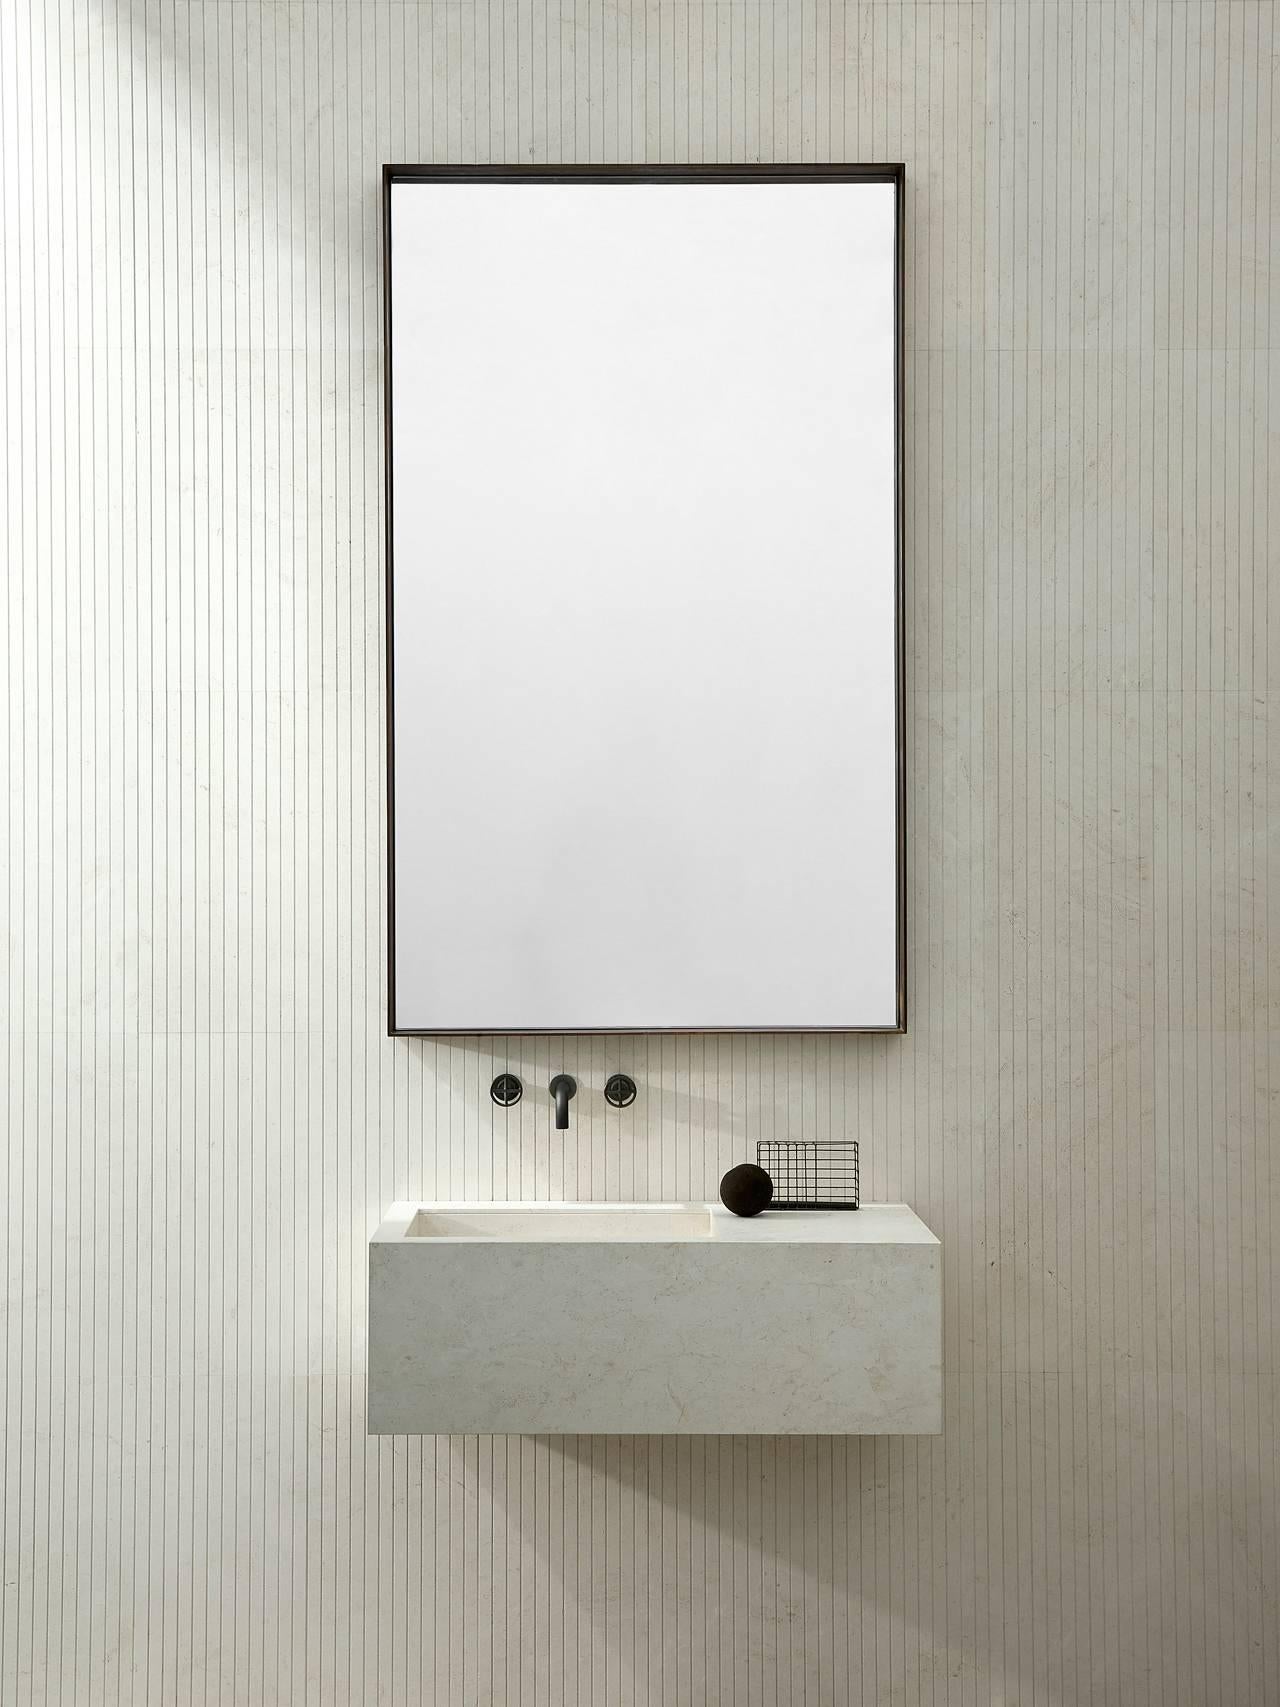 The depth of the burnished brass frame is the defining feature of the Quadro mirror. At 7.5 cm, it not only creates a bold aesthetic effect, but is also highly practical in a bathroom, allowing you to place objects on what effectively becomes a